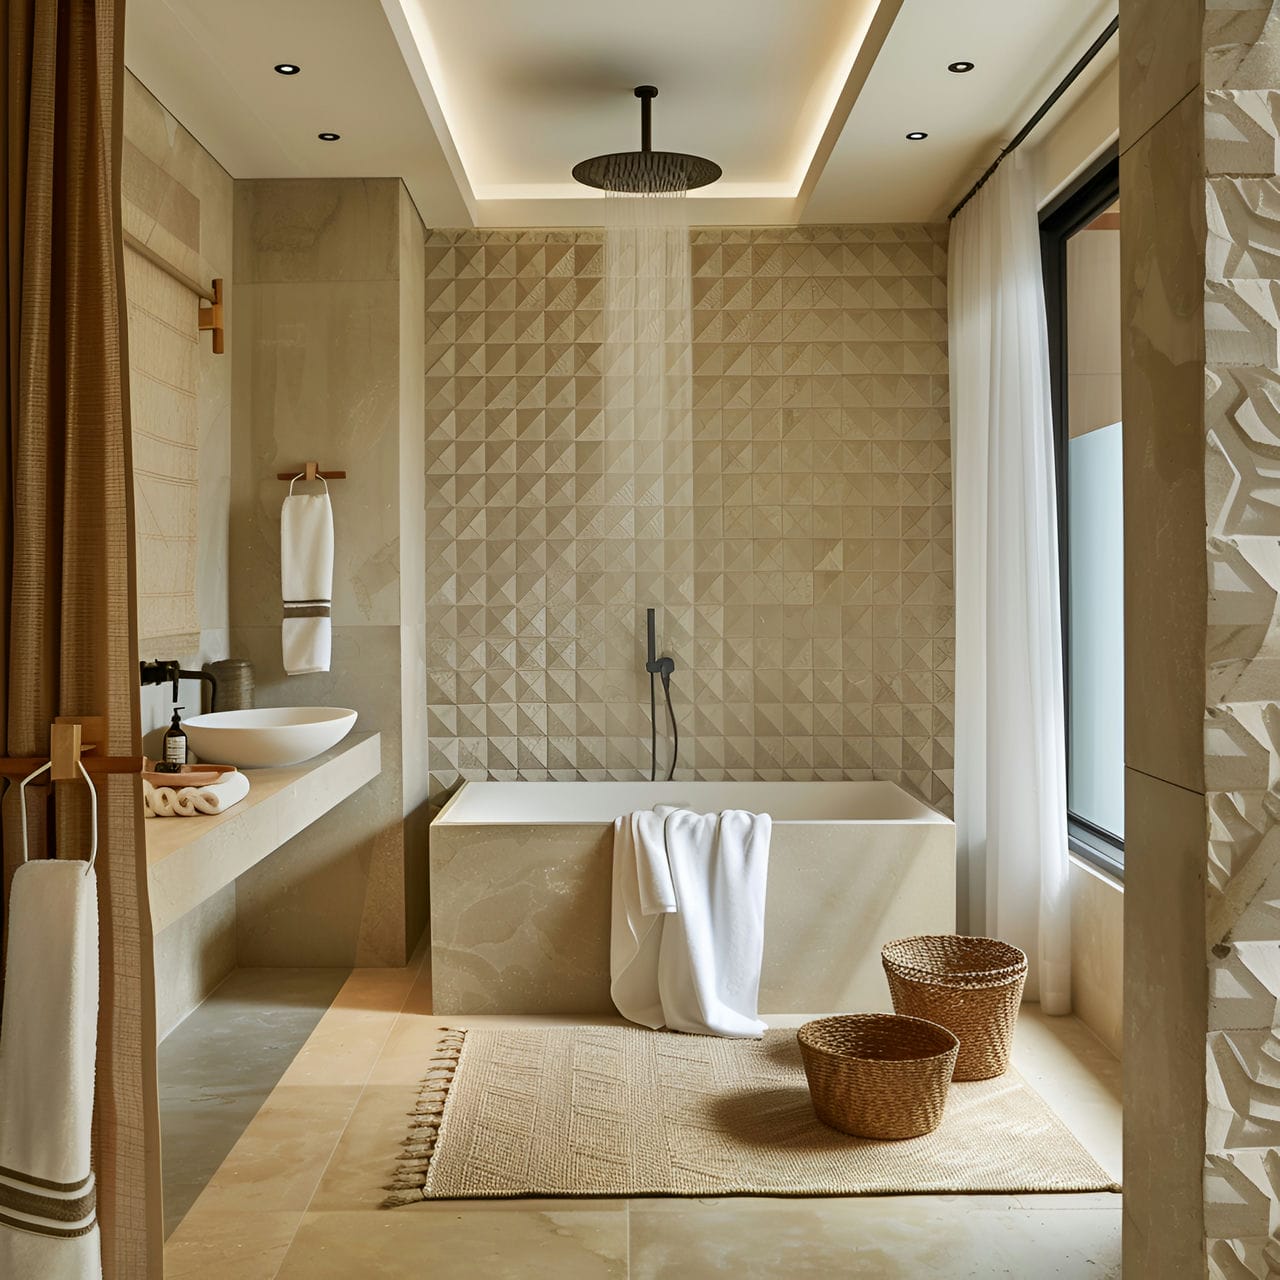 Ensuite bathroom: size, functionality, uses, furniture and renovation